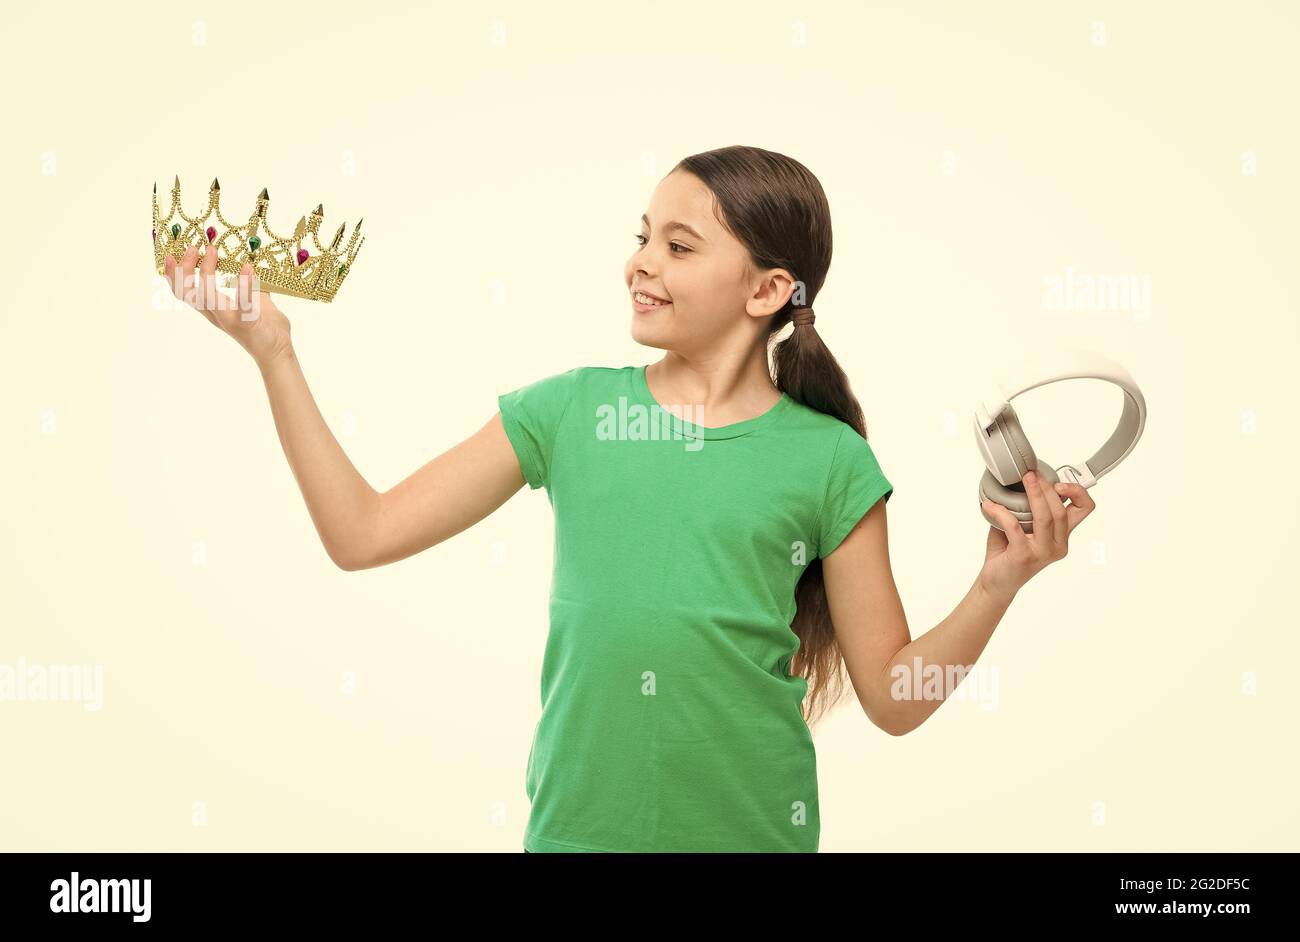 queen of music. portrait of cheerful girl isolated on white. happy childhood. small girl choose between crown and headphones. being a super star. best Stock Photo